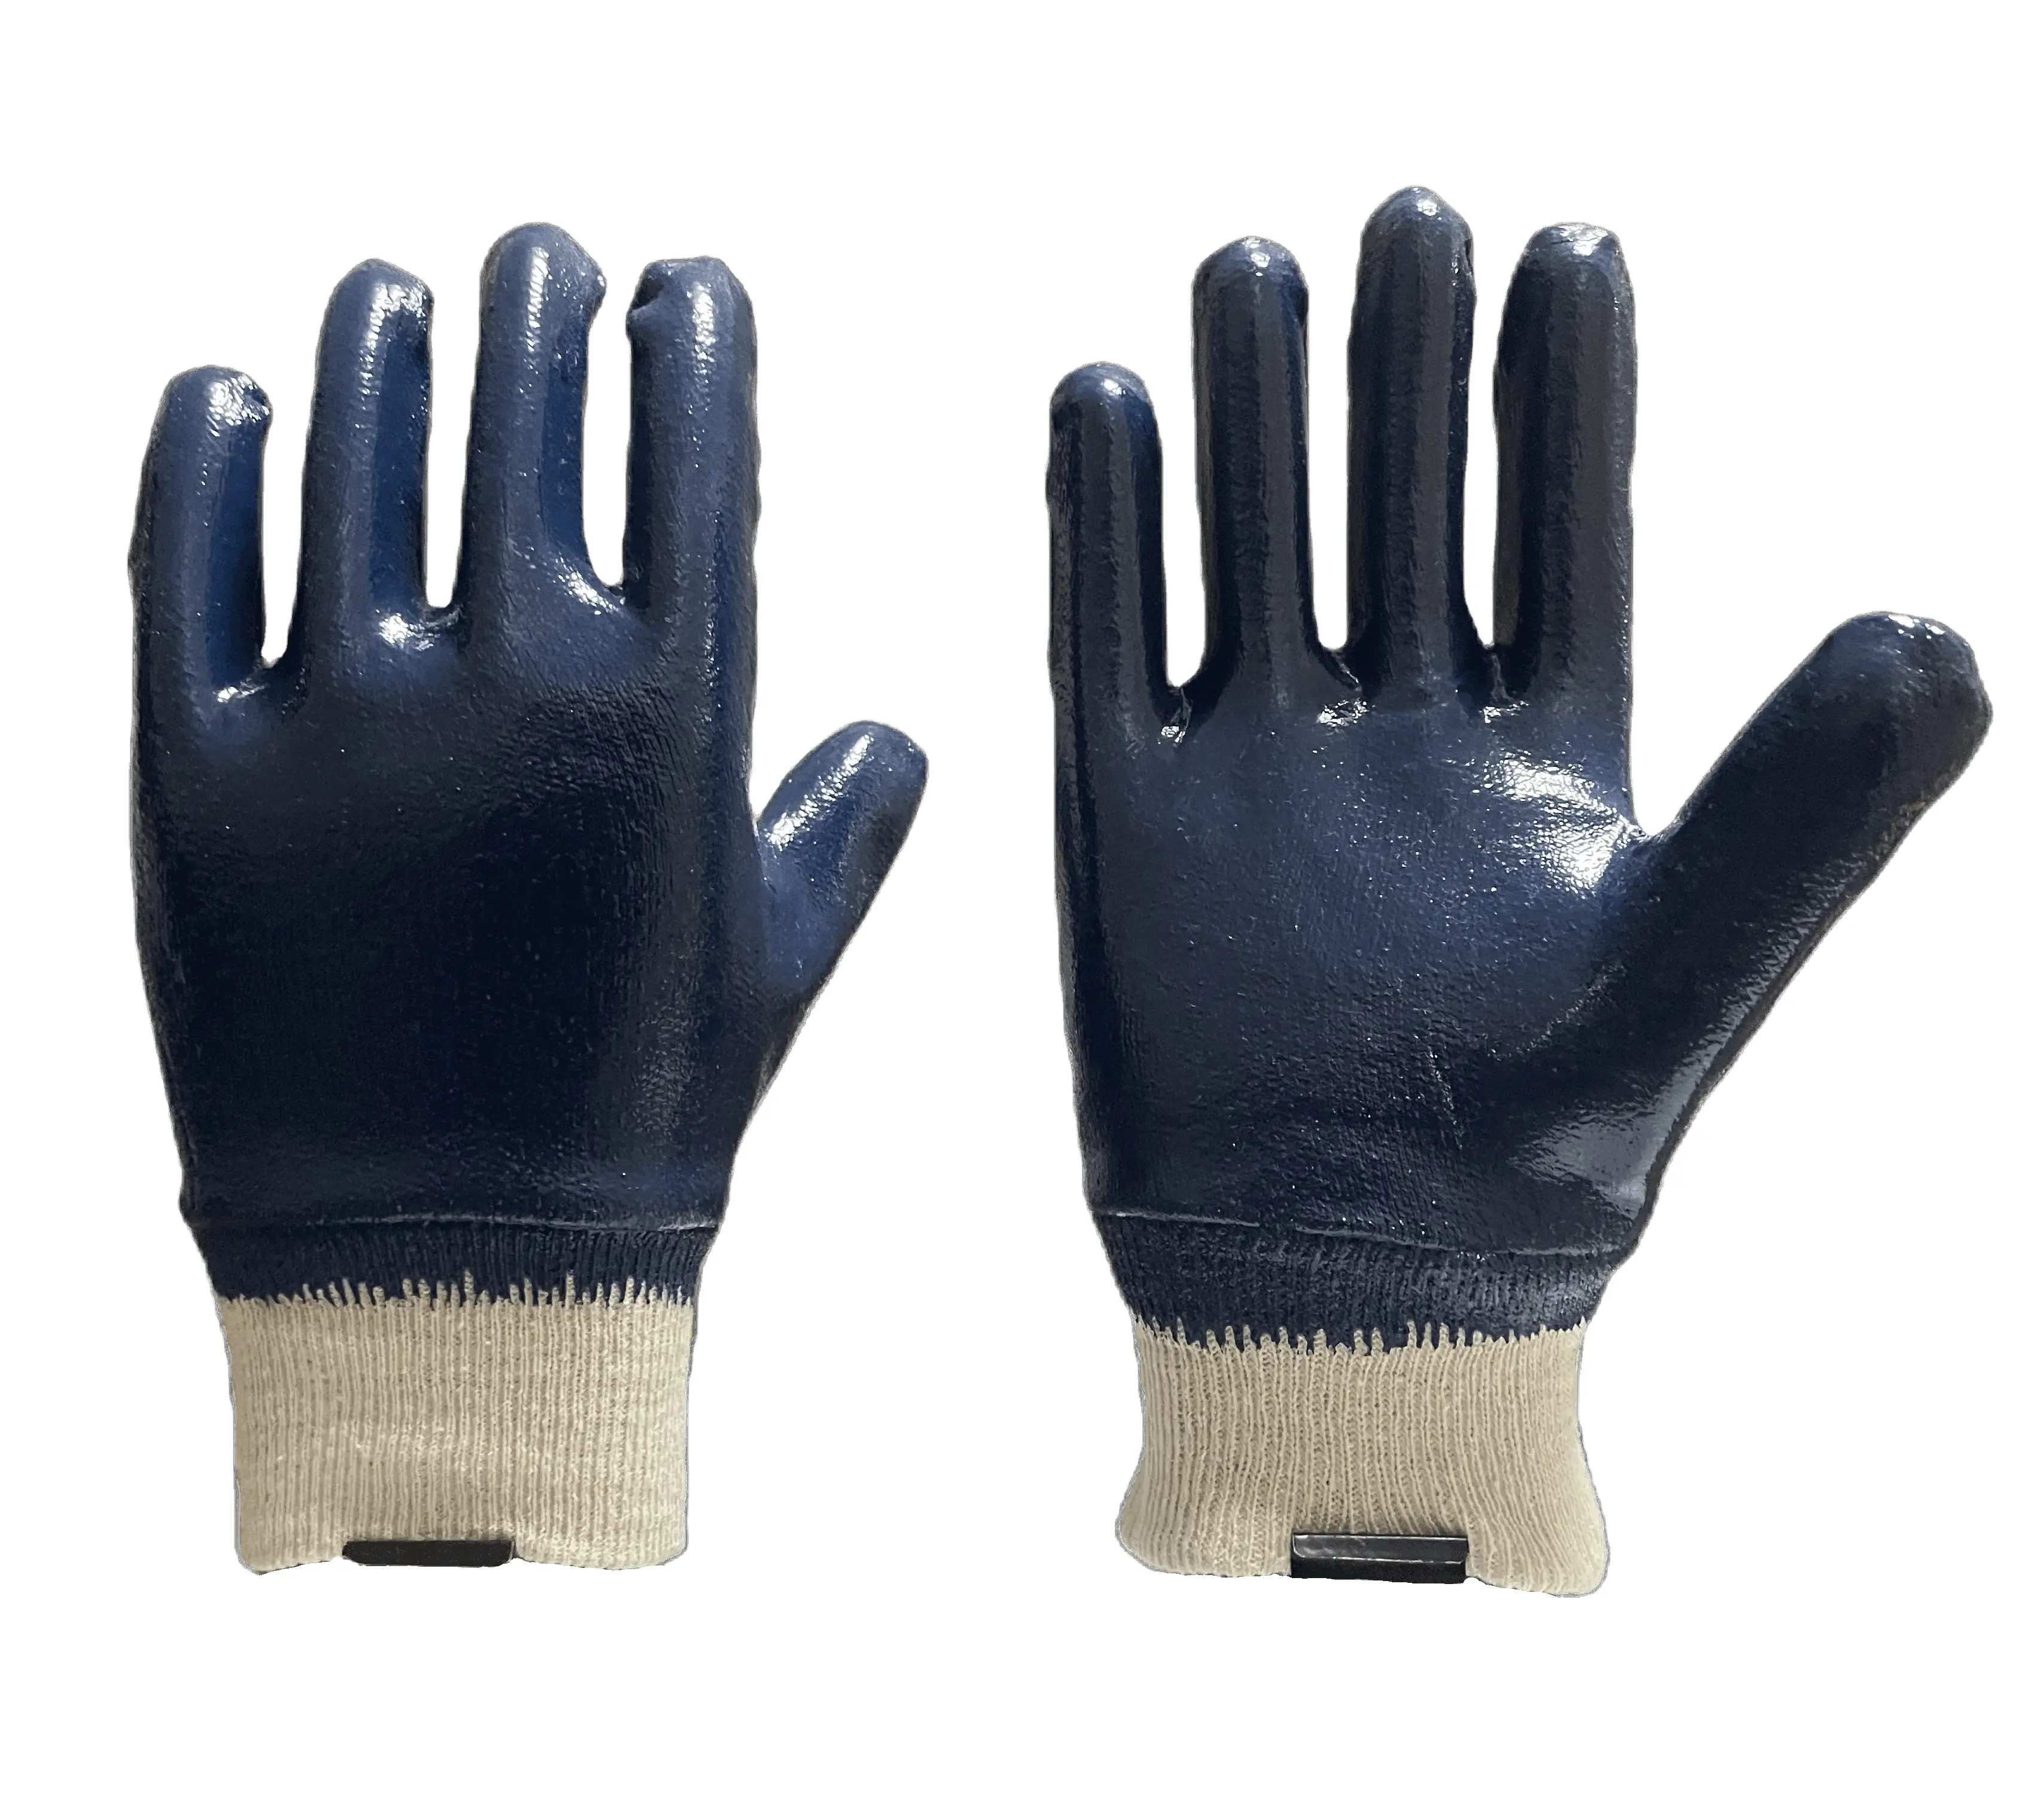 Hot Sale Heavy Duty Cotton Jersey Nitrile Fully Coated High Quality Knit Wrist Gloves